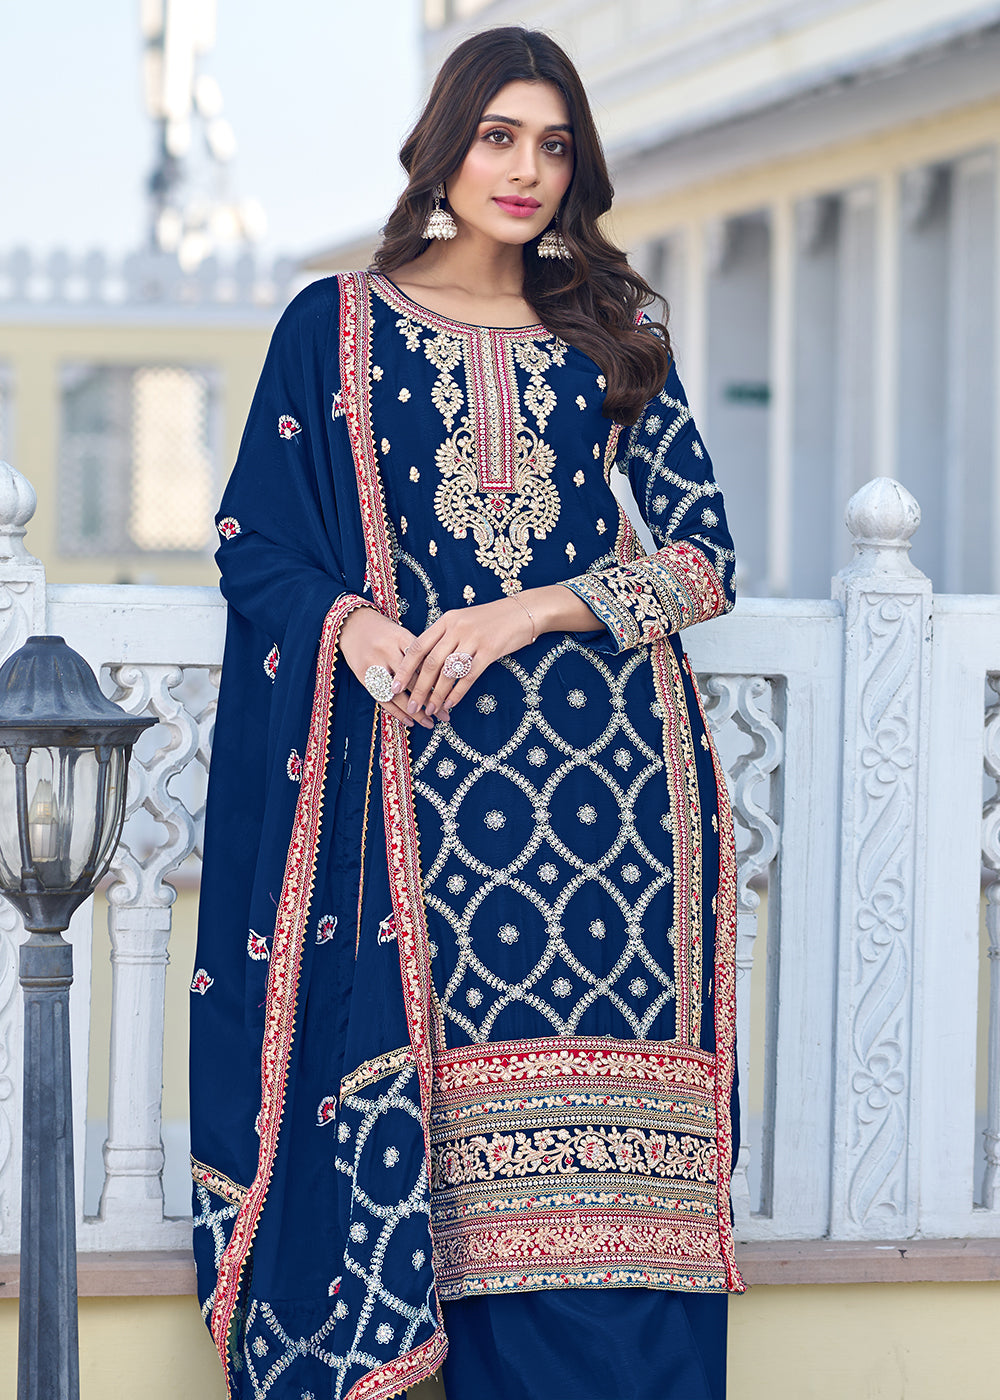 Buy Now Palazzo Style Prussian Blue Chinnon Embroidered Salwar Suit Online in USA, UK, Canada, Germany, Australia & Worldwide at Empress Clothing. 